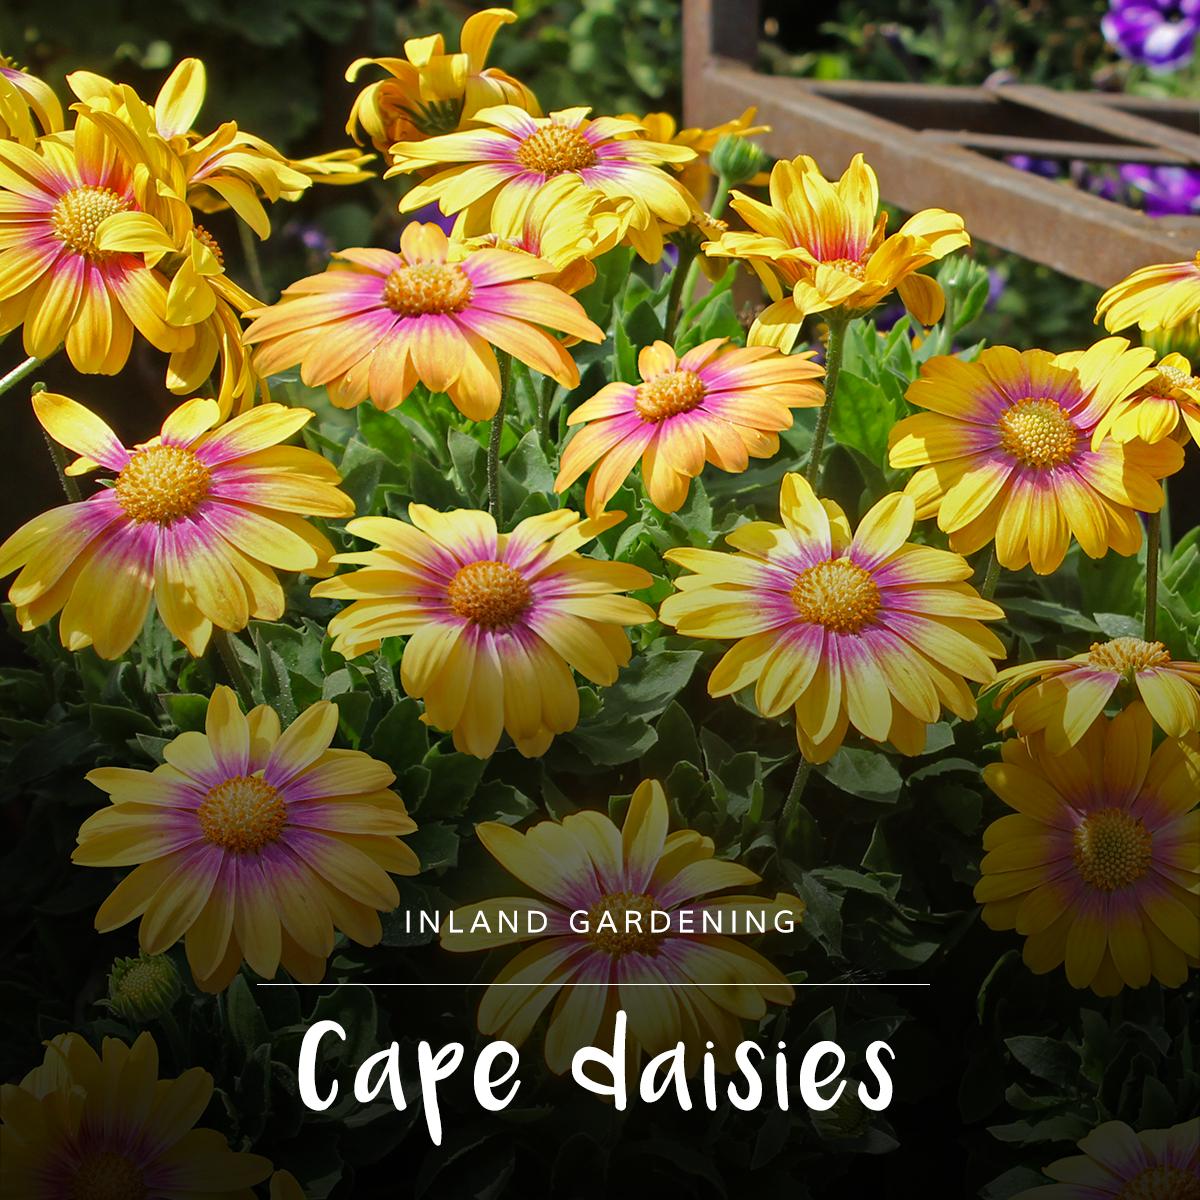 Plant the full range of Cape daisies for instant colour – they flower now and love the cooler weather. Visit ow.ly/AqfS50ot2jj for #gardeningtips in your region! #inlandgardening #Capedaisies